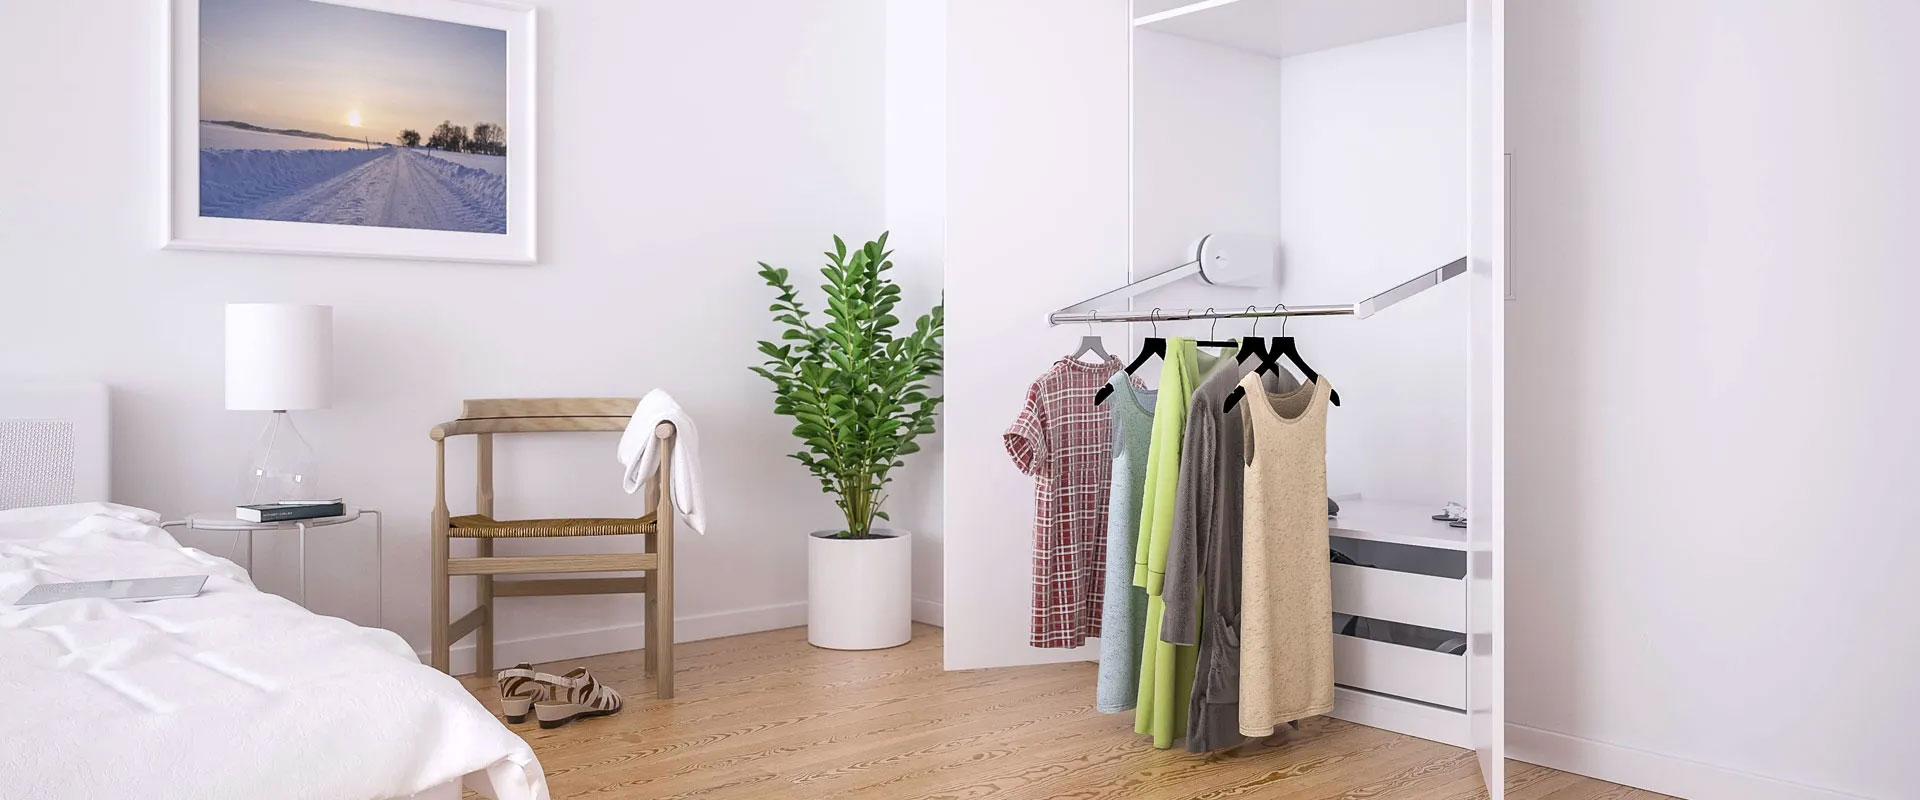 Making the wardrobe accessible to wheelchair users